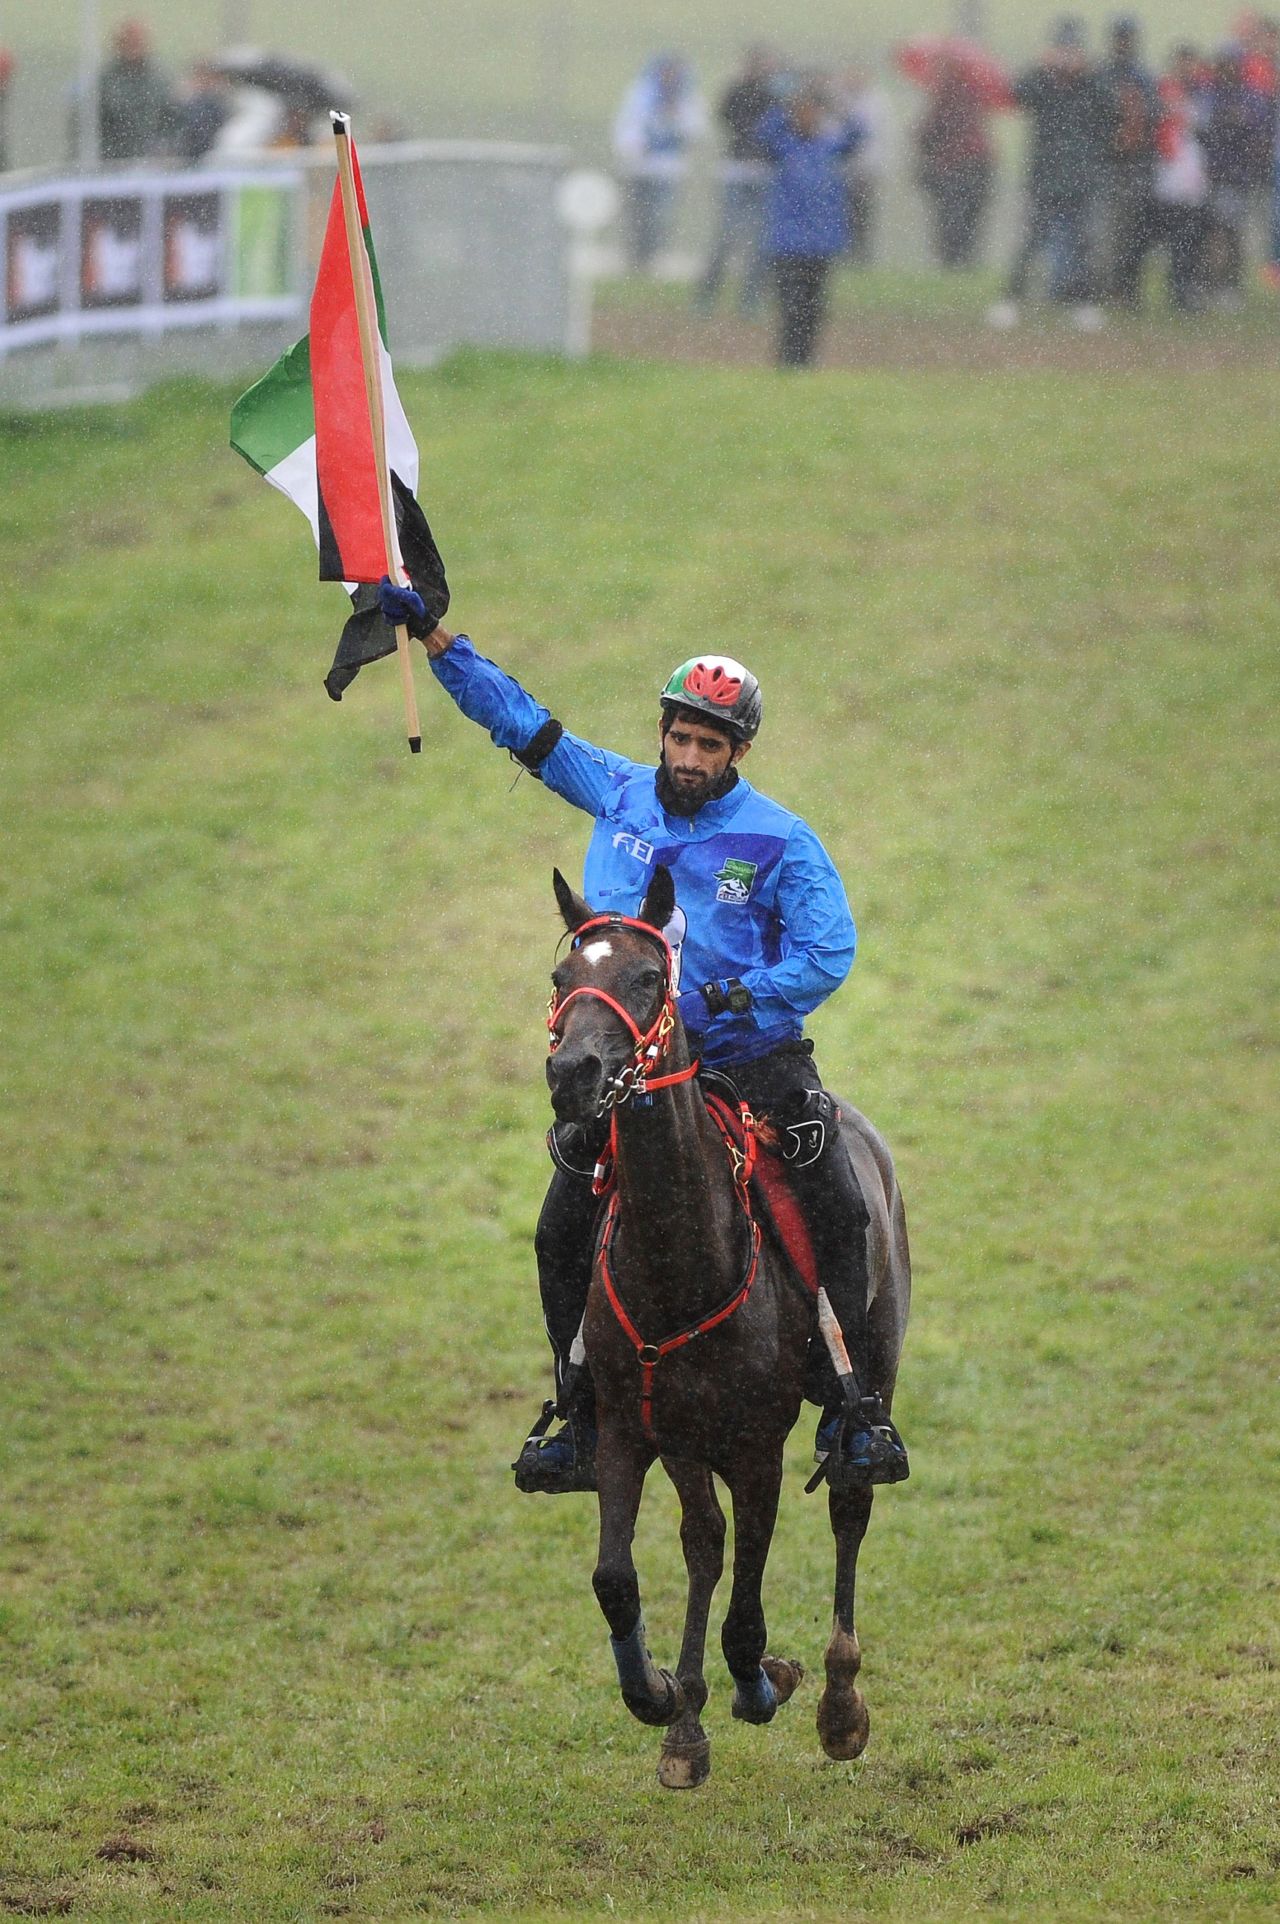 In the individual endurance race, Sheikh Hamdan bin Mohd Al Maktoum of United Arab Emirates was first home in the 160 km competition riding Yamamah.  